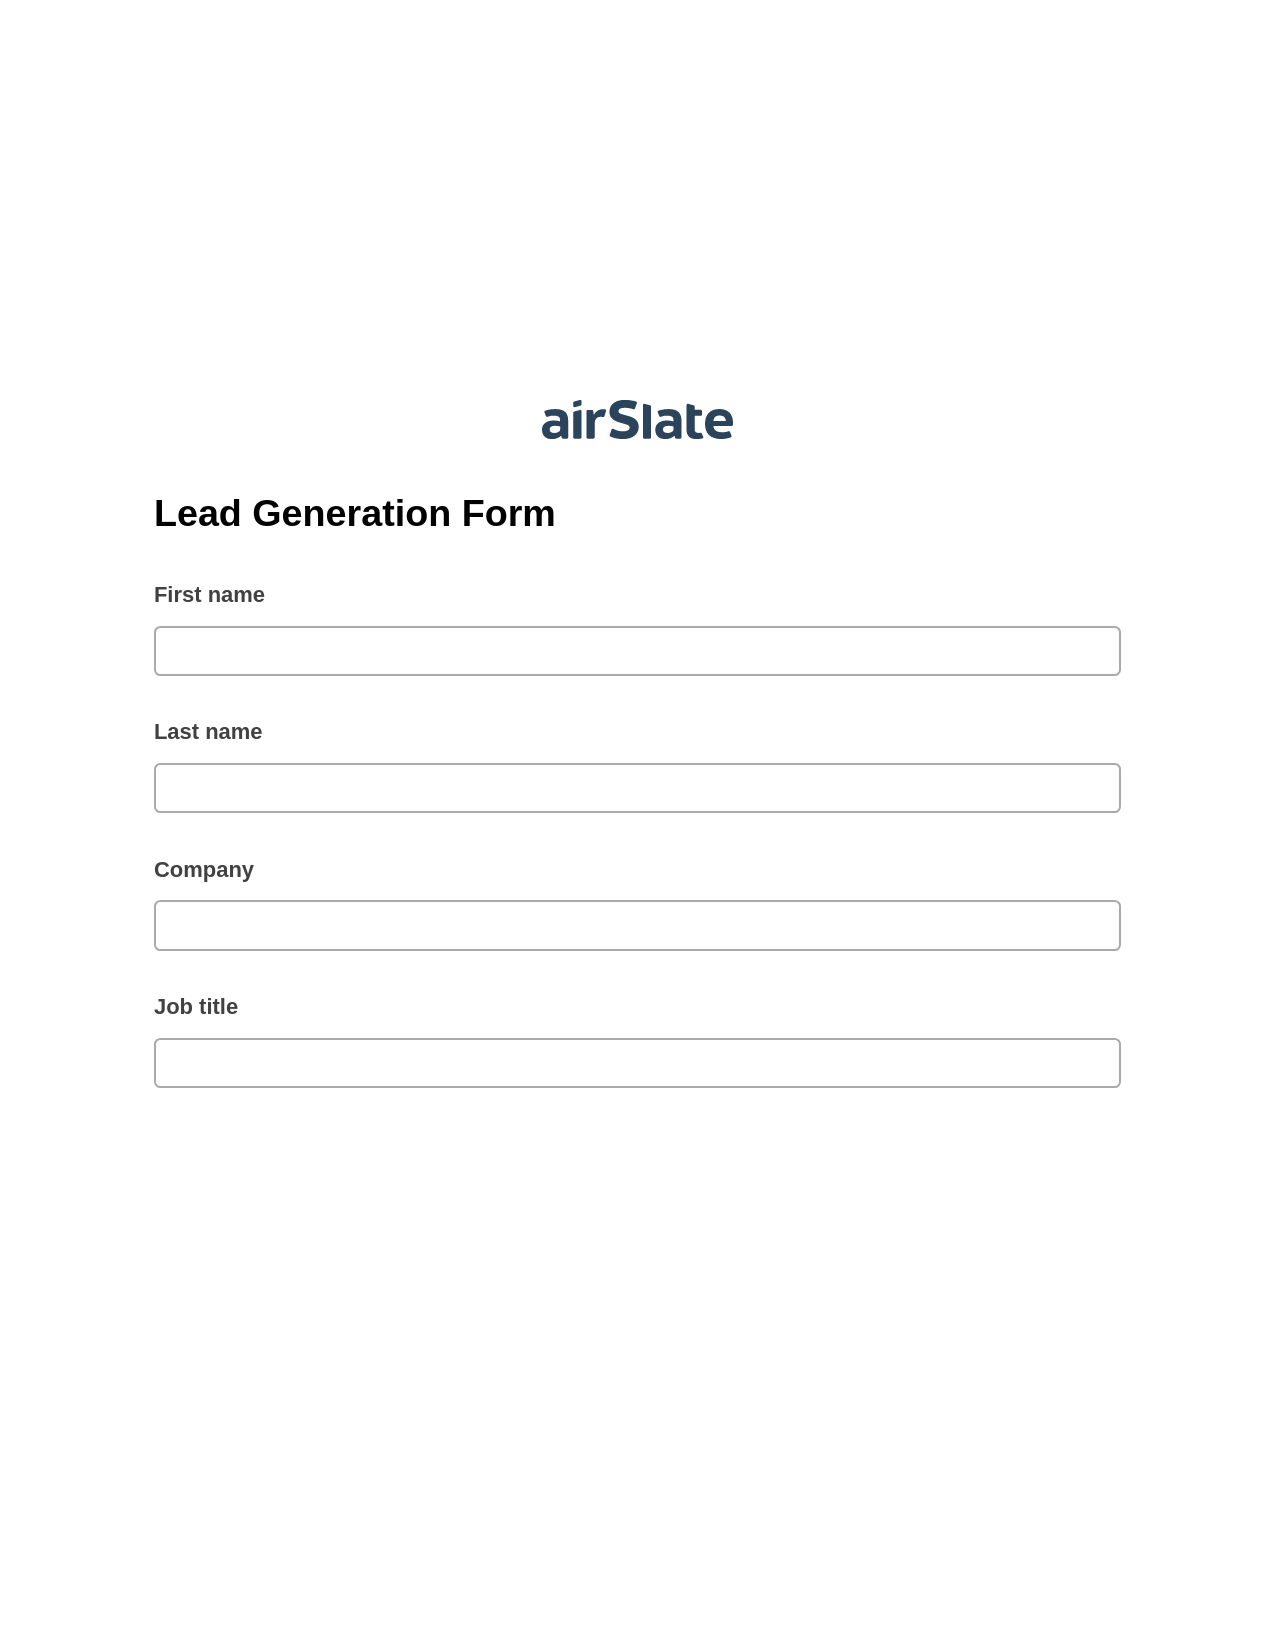 Lead Generation Form Pre-fill from Google Sheets Bot, Remove Tags From Slate Bot, Archive to OneDrive Bot